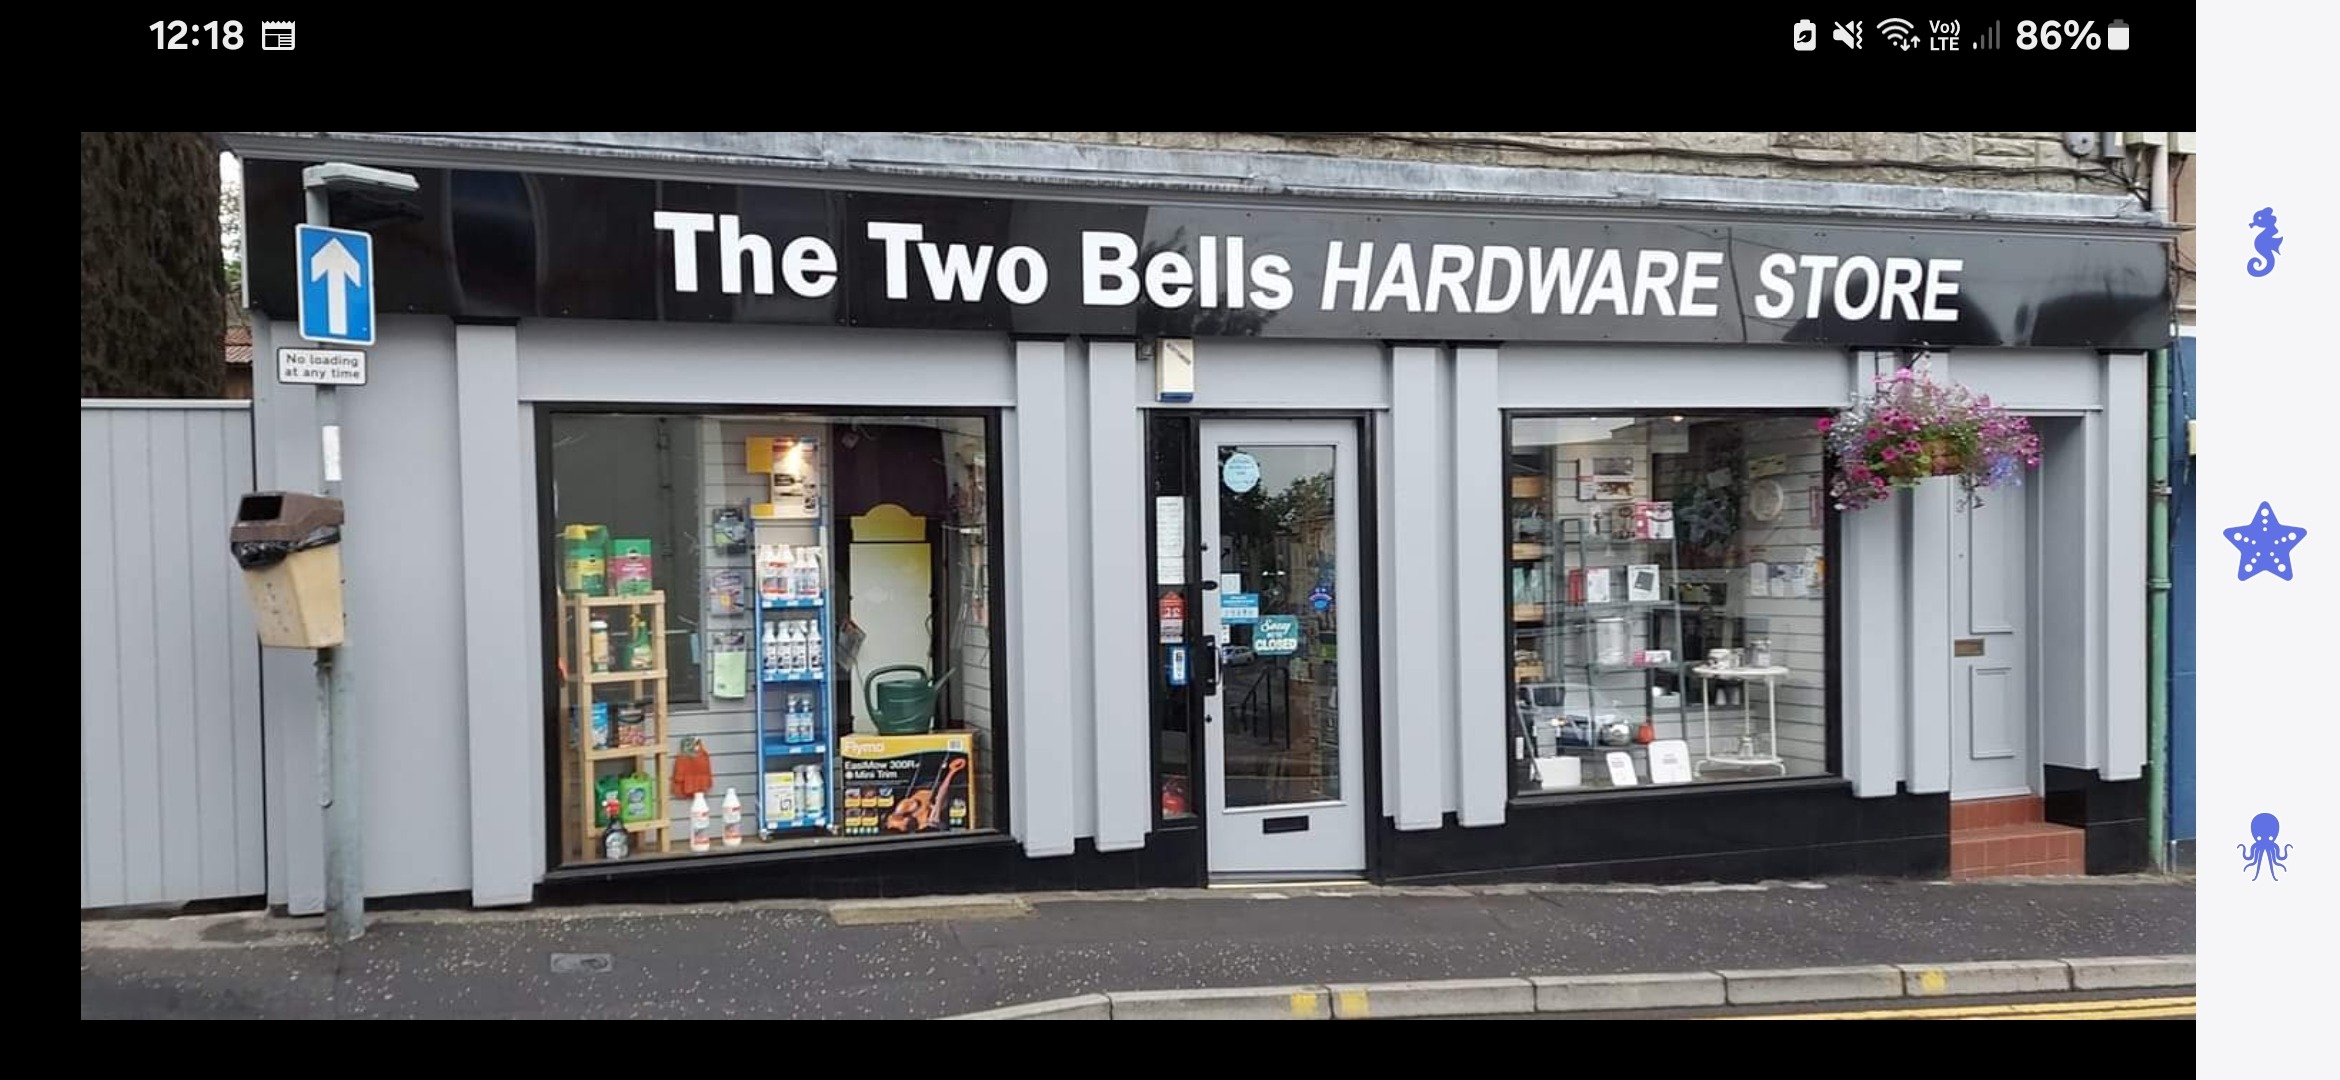 Blair Hardware Store The Two Bells